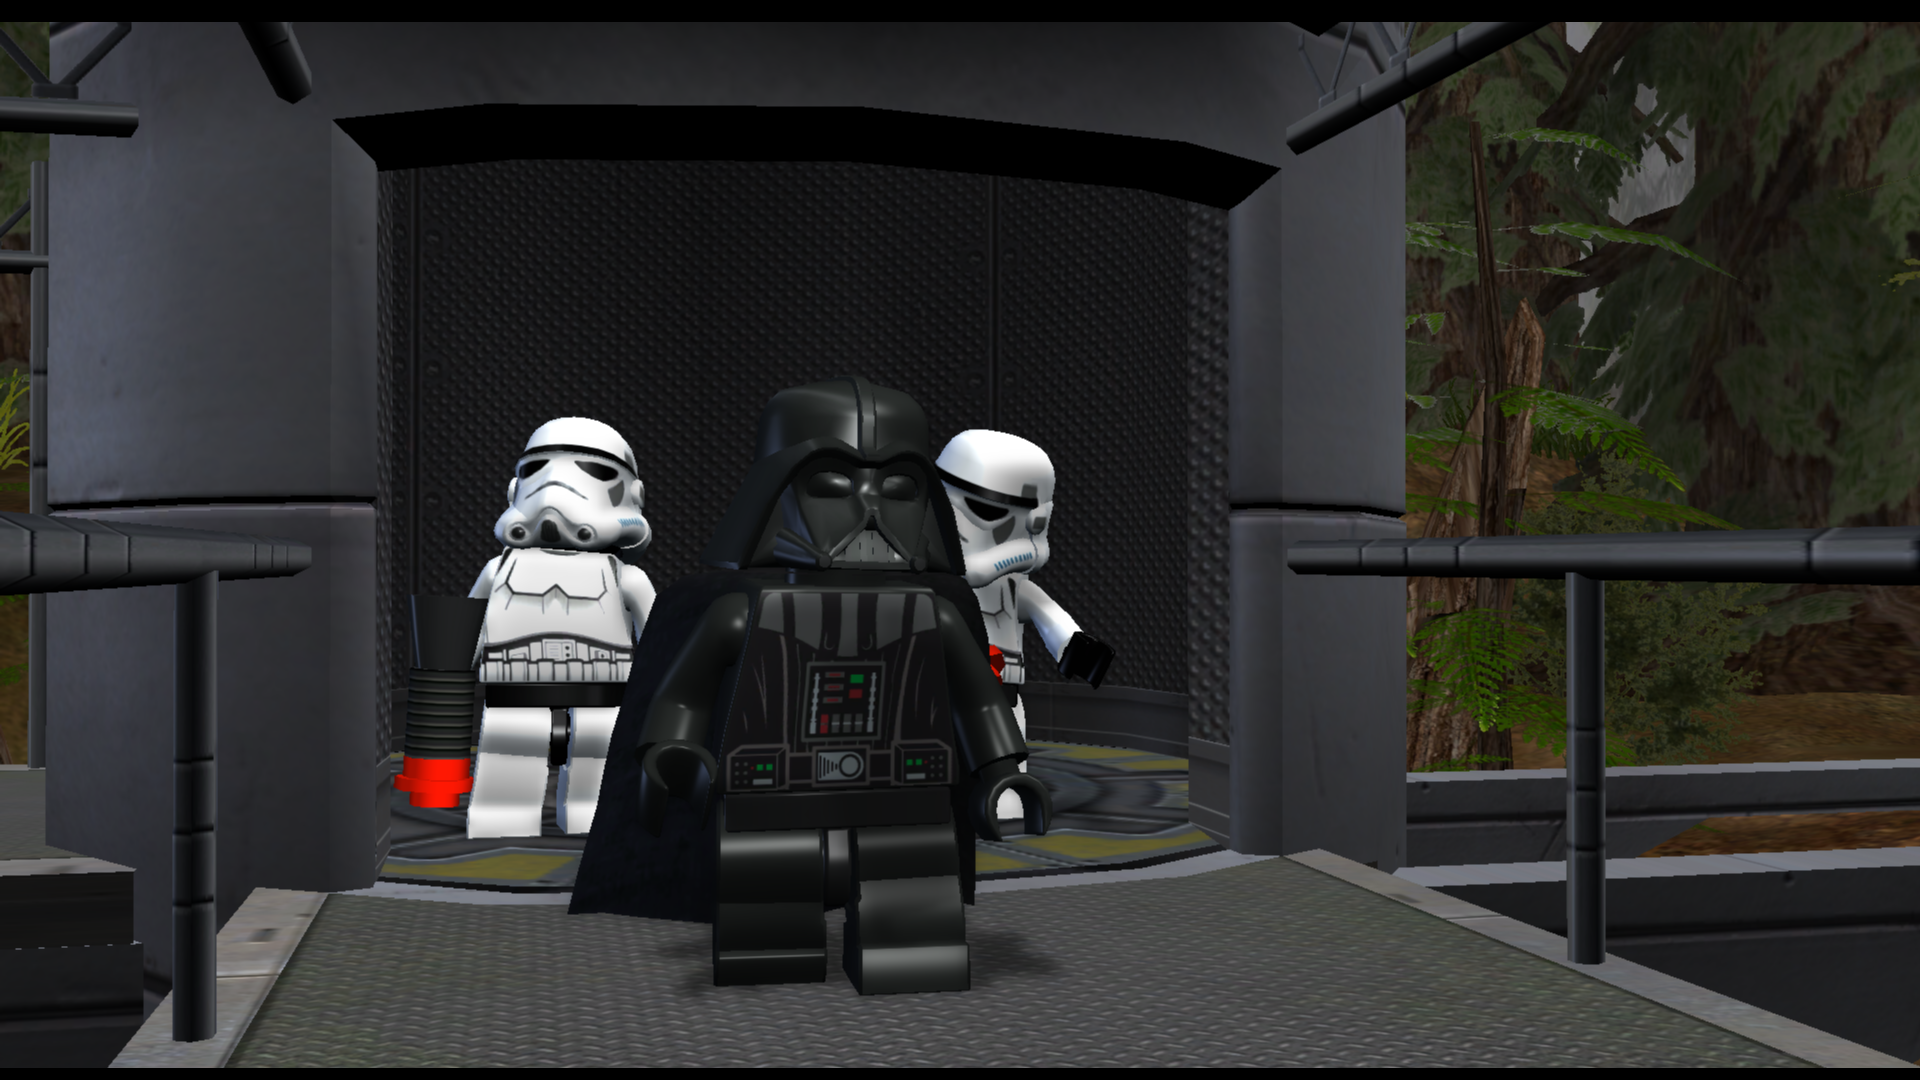 Image 22 - Lego Star Wars Modernized Character Texture Pack for LEGO Star W...